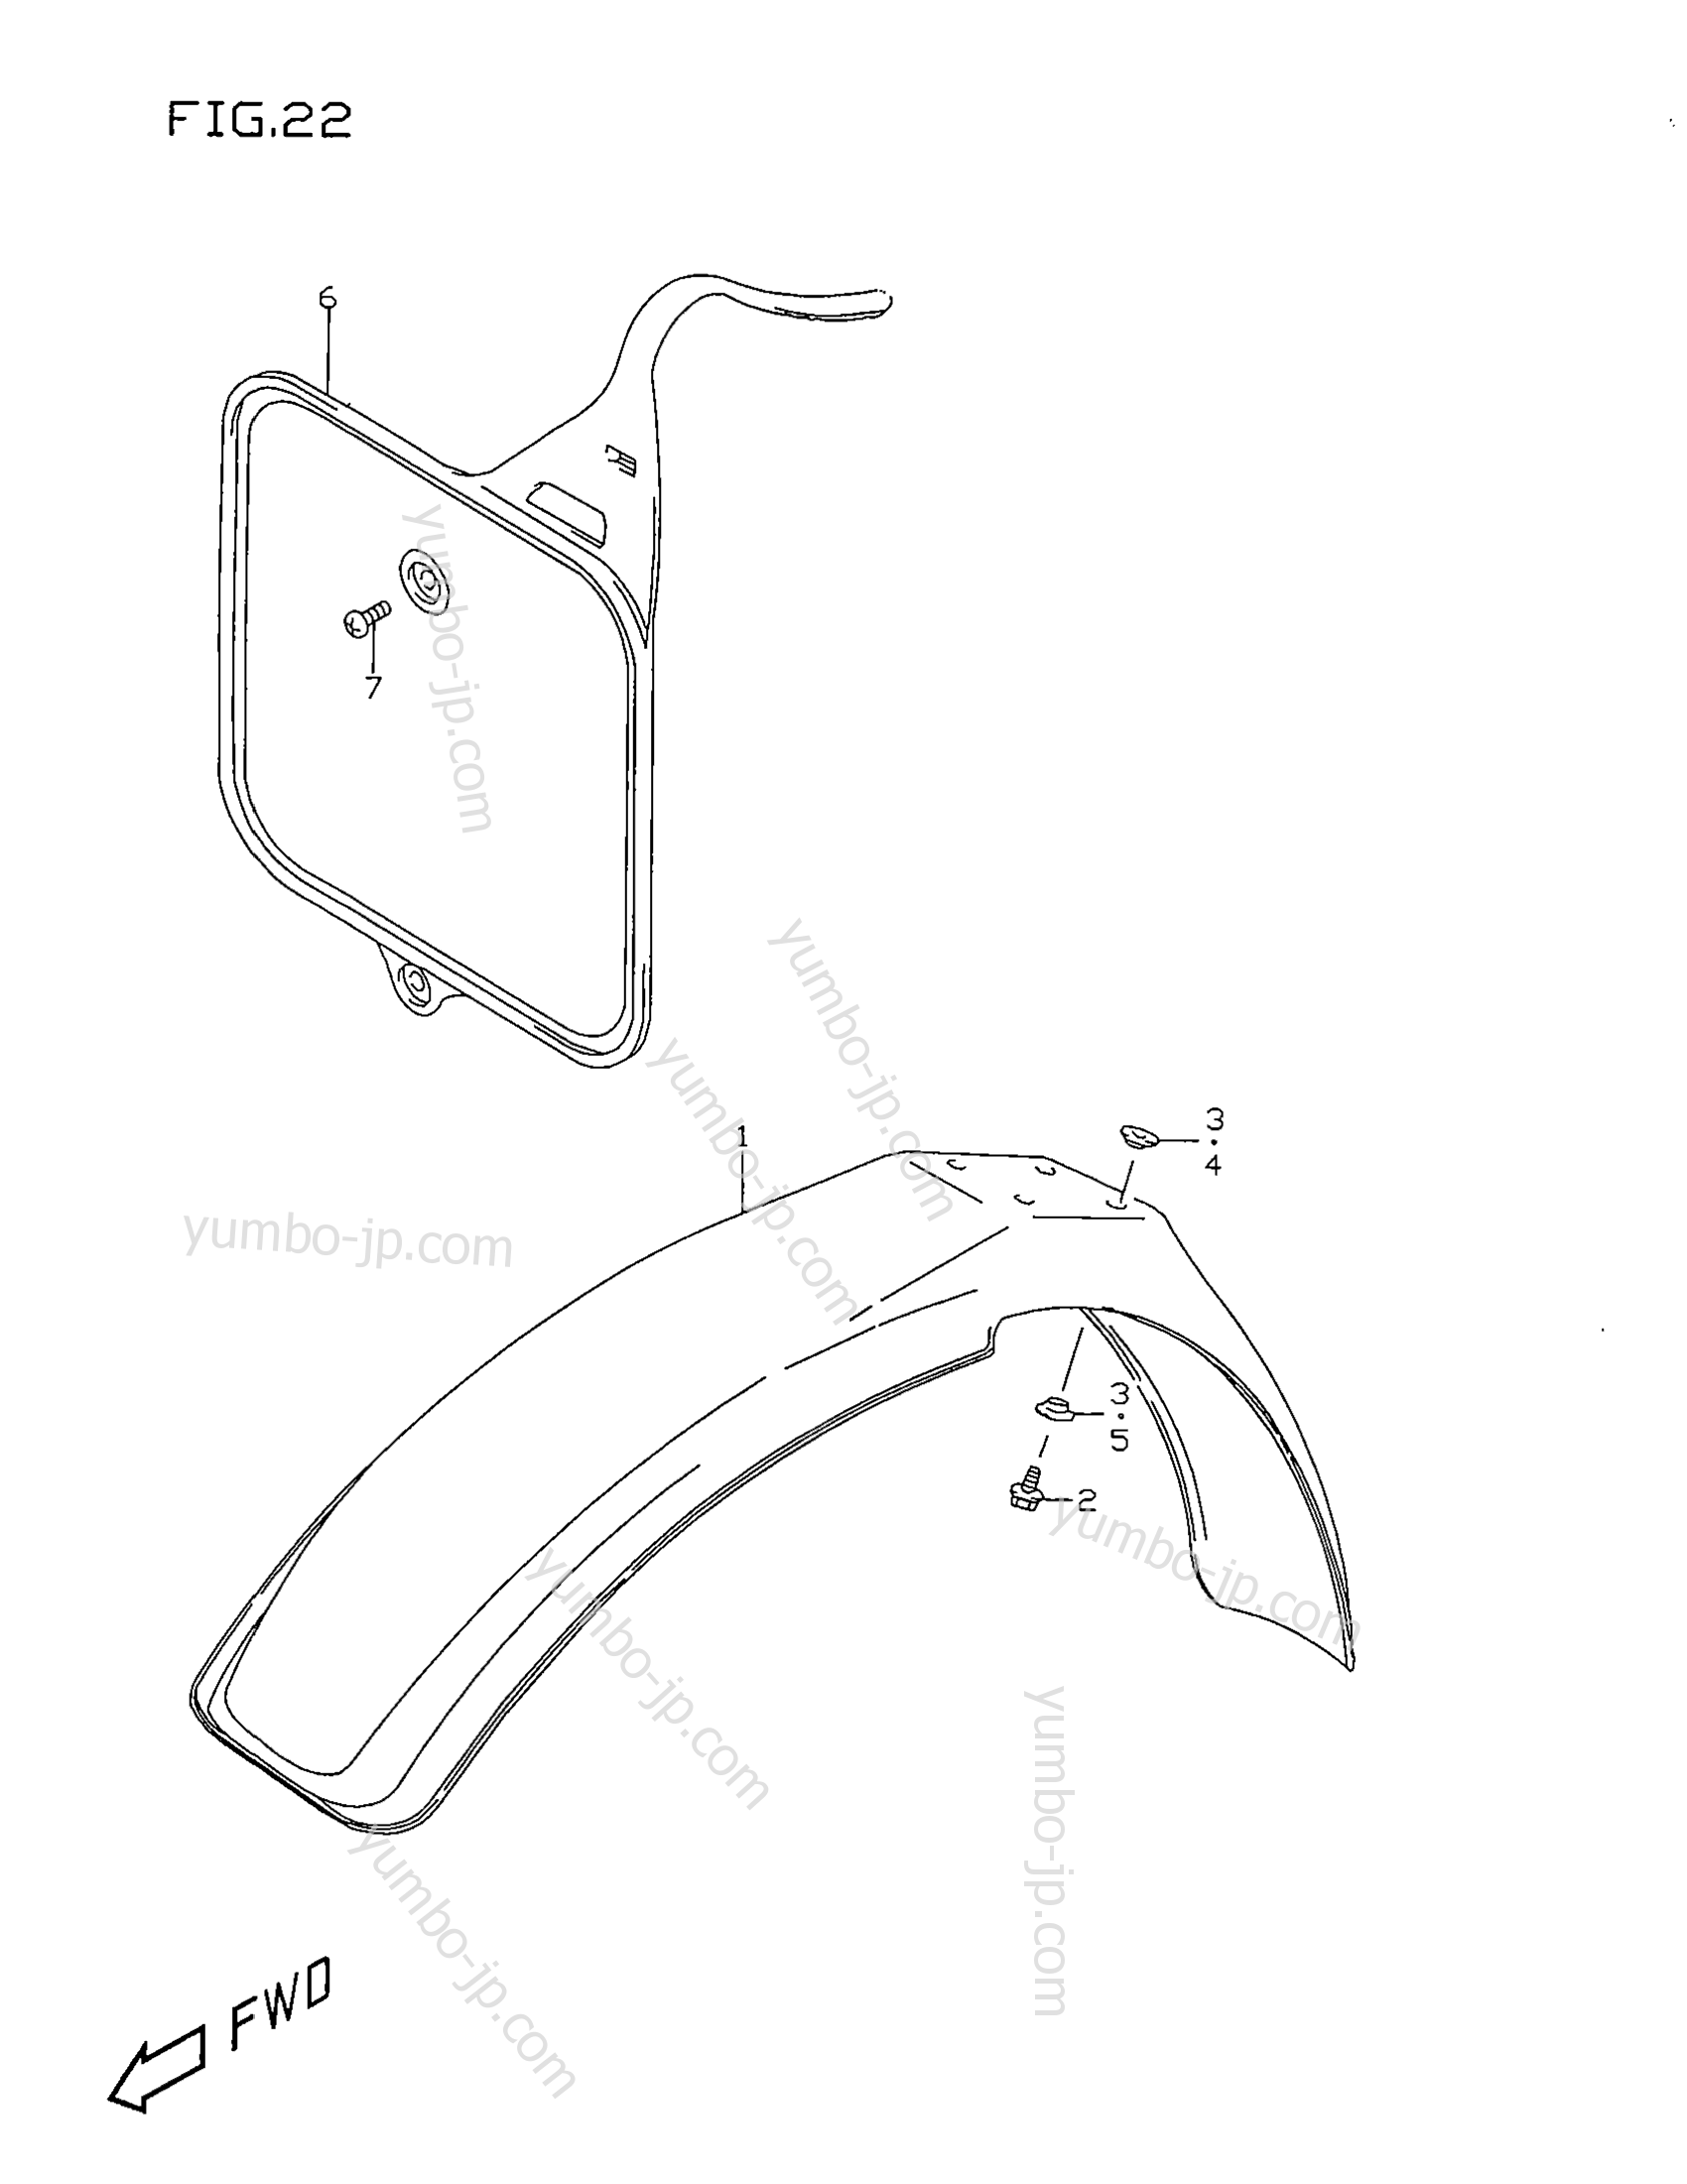 FRONT FENDER for motorcycles SUZUKI RM80 1999 year